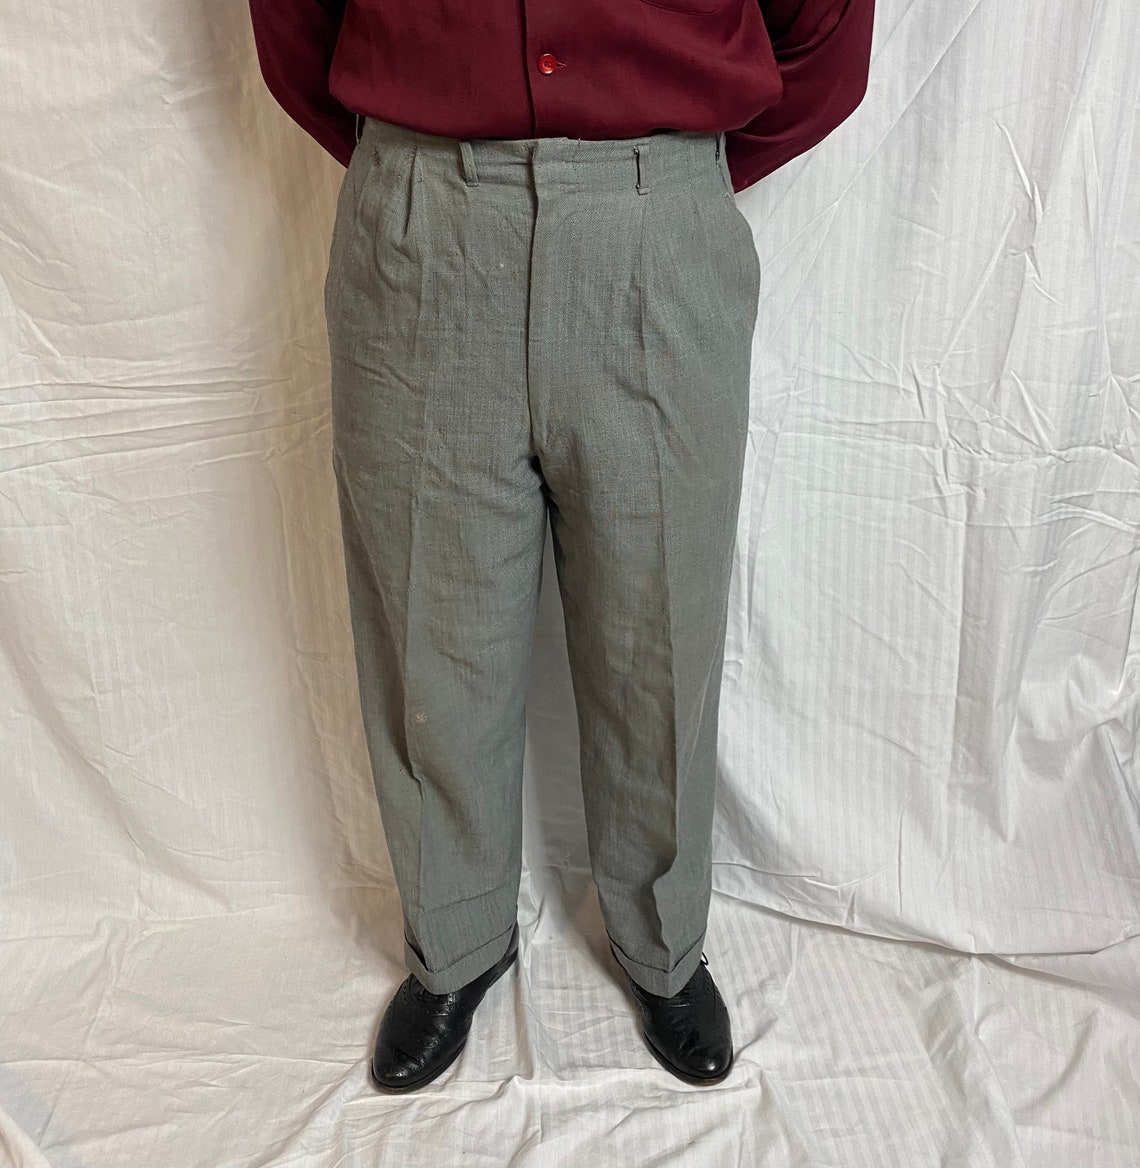 Early Vintage Mens 1950s Gray Trouser with Red Fleck | Etsy